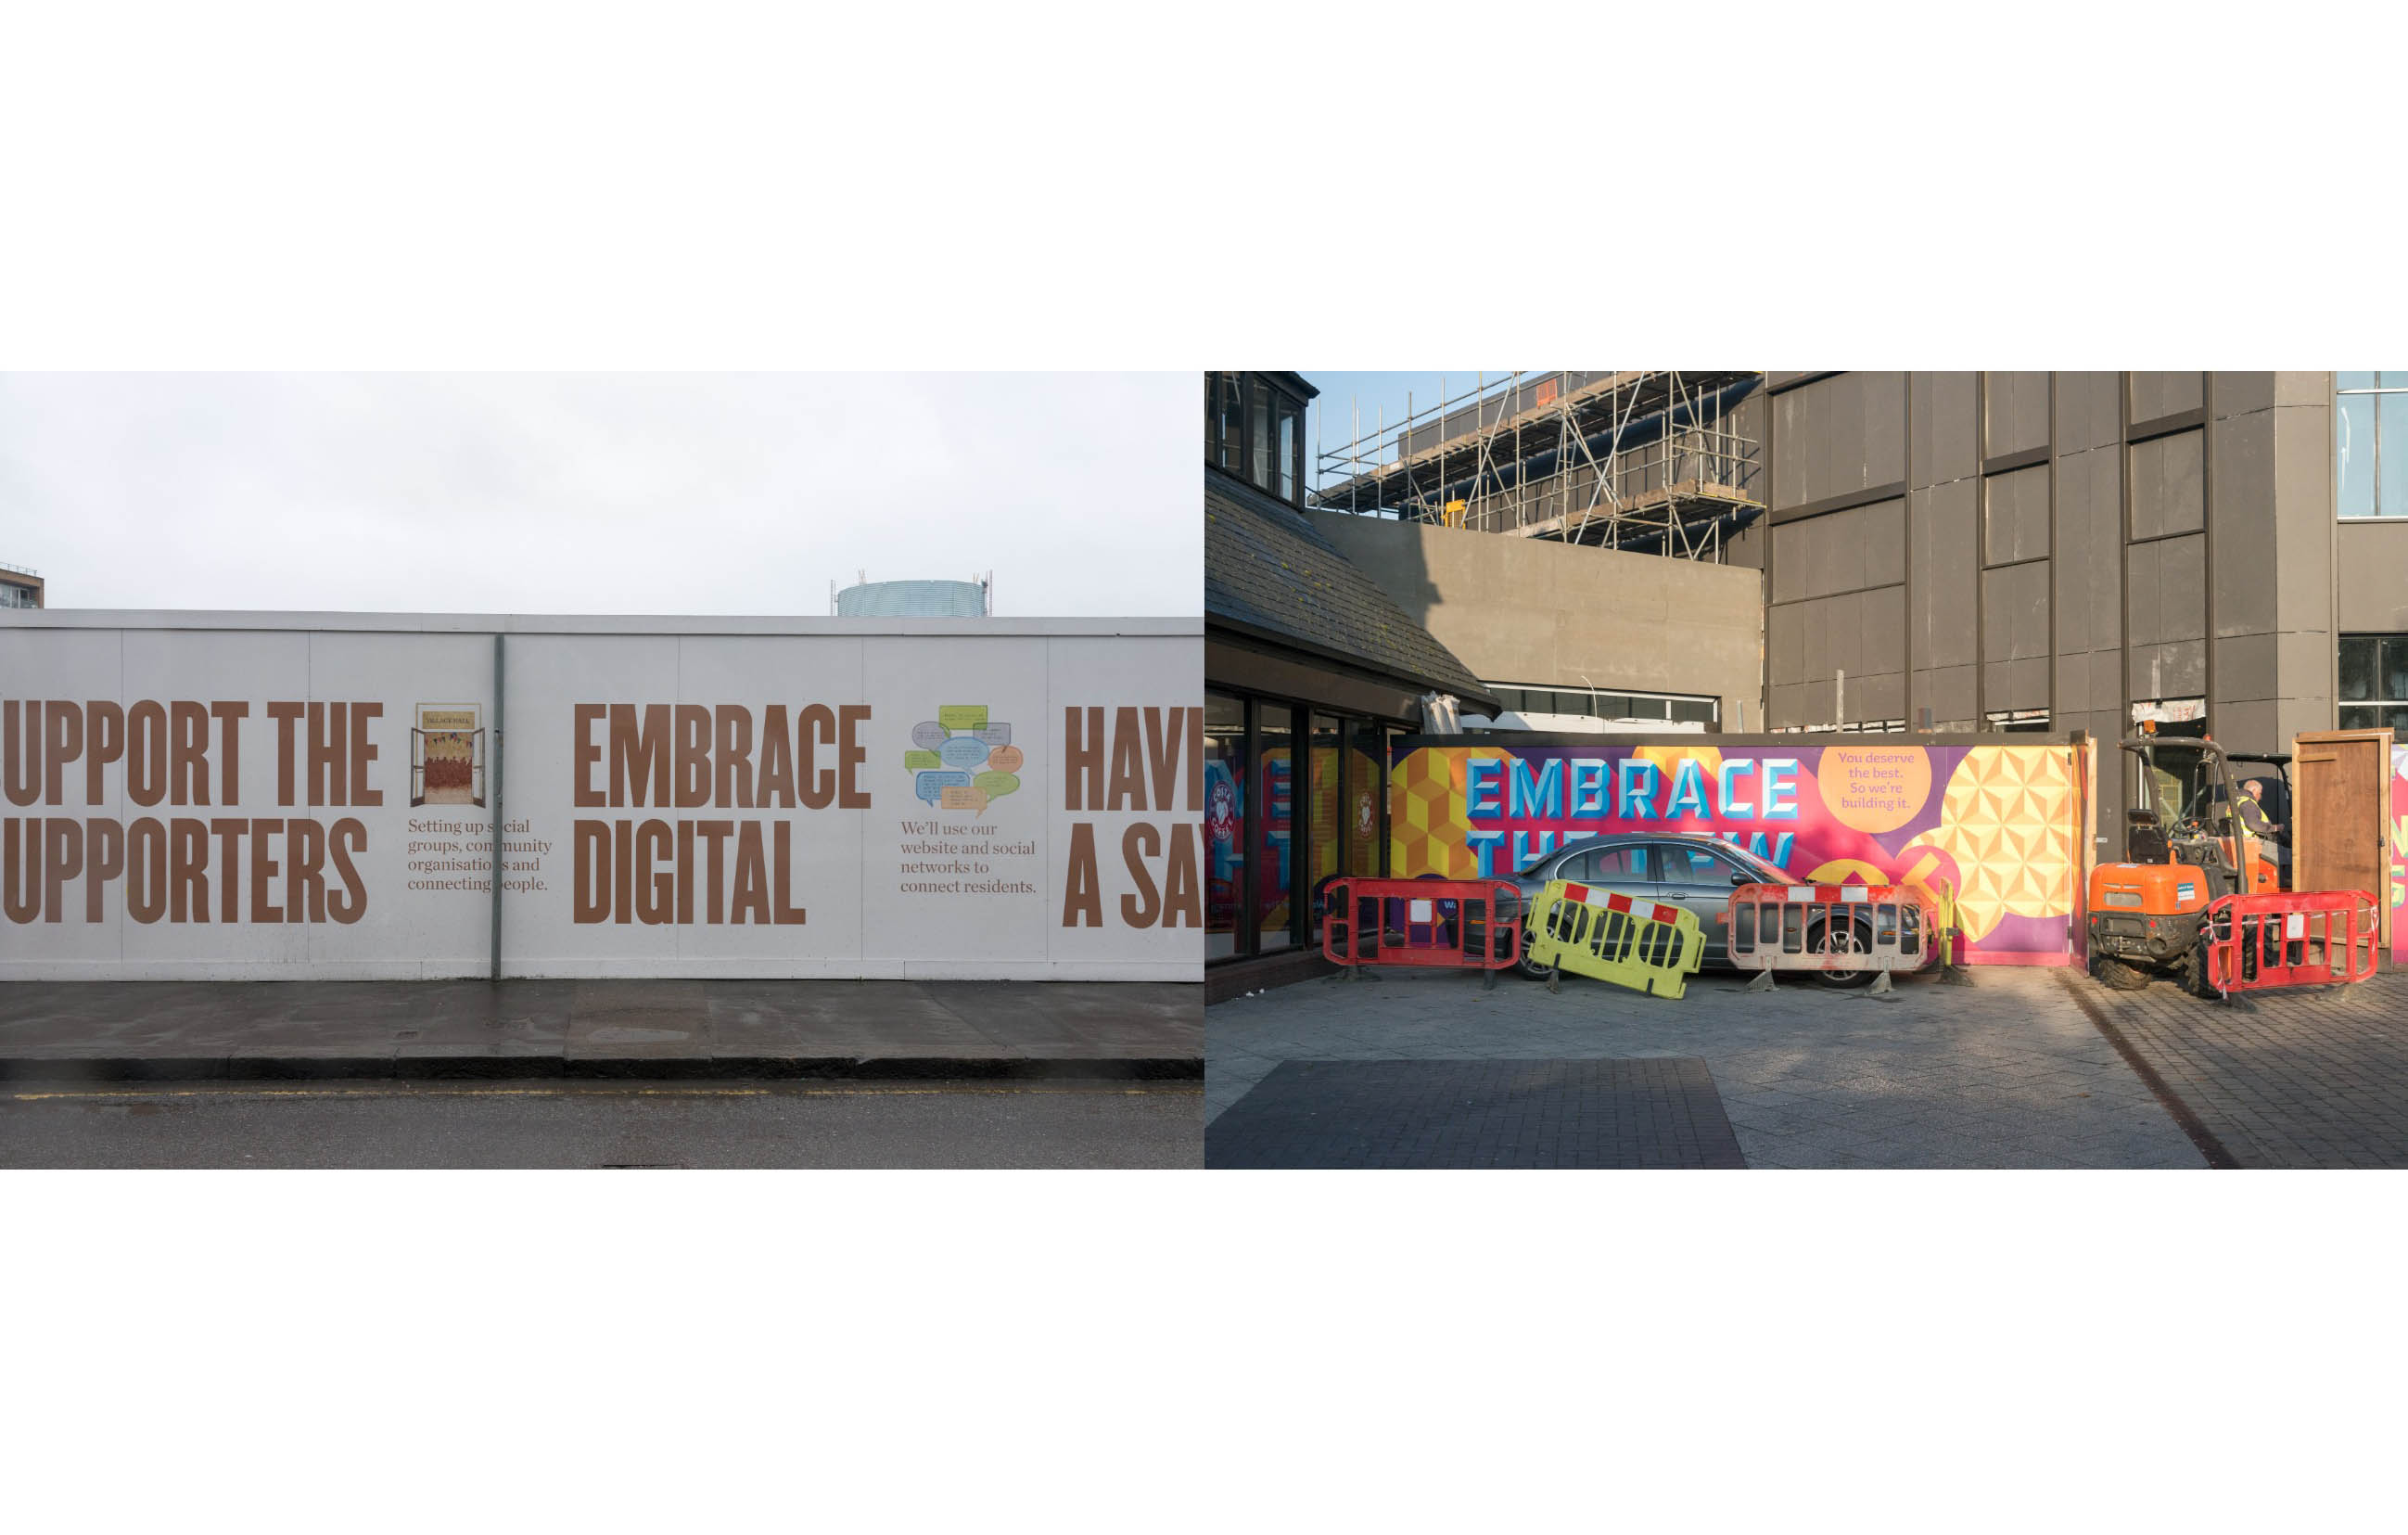 two photographs of hoardings in different locations, one says support the supporters and embrace digital, the other says embrace the new